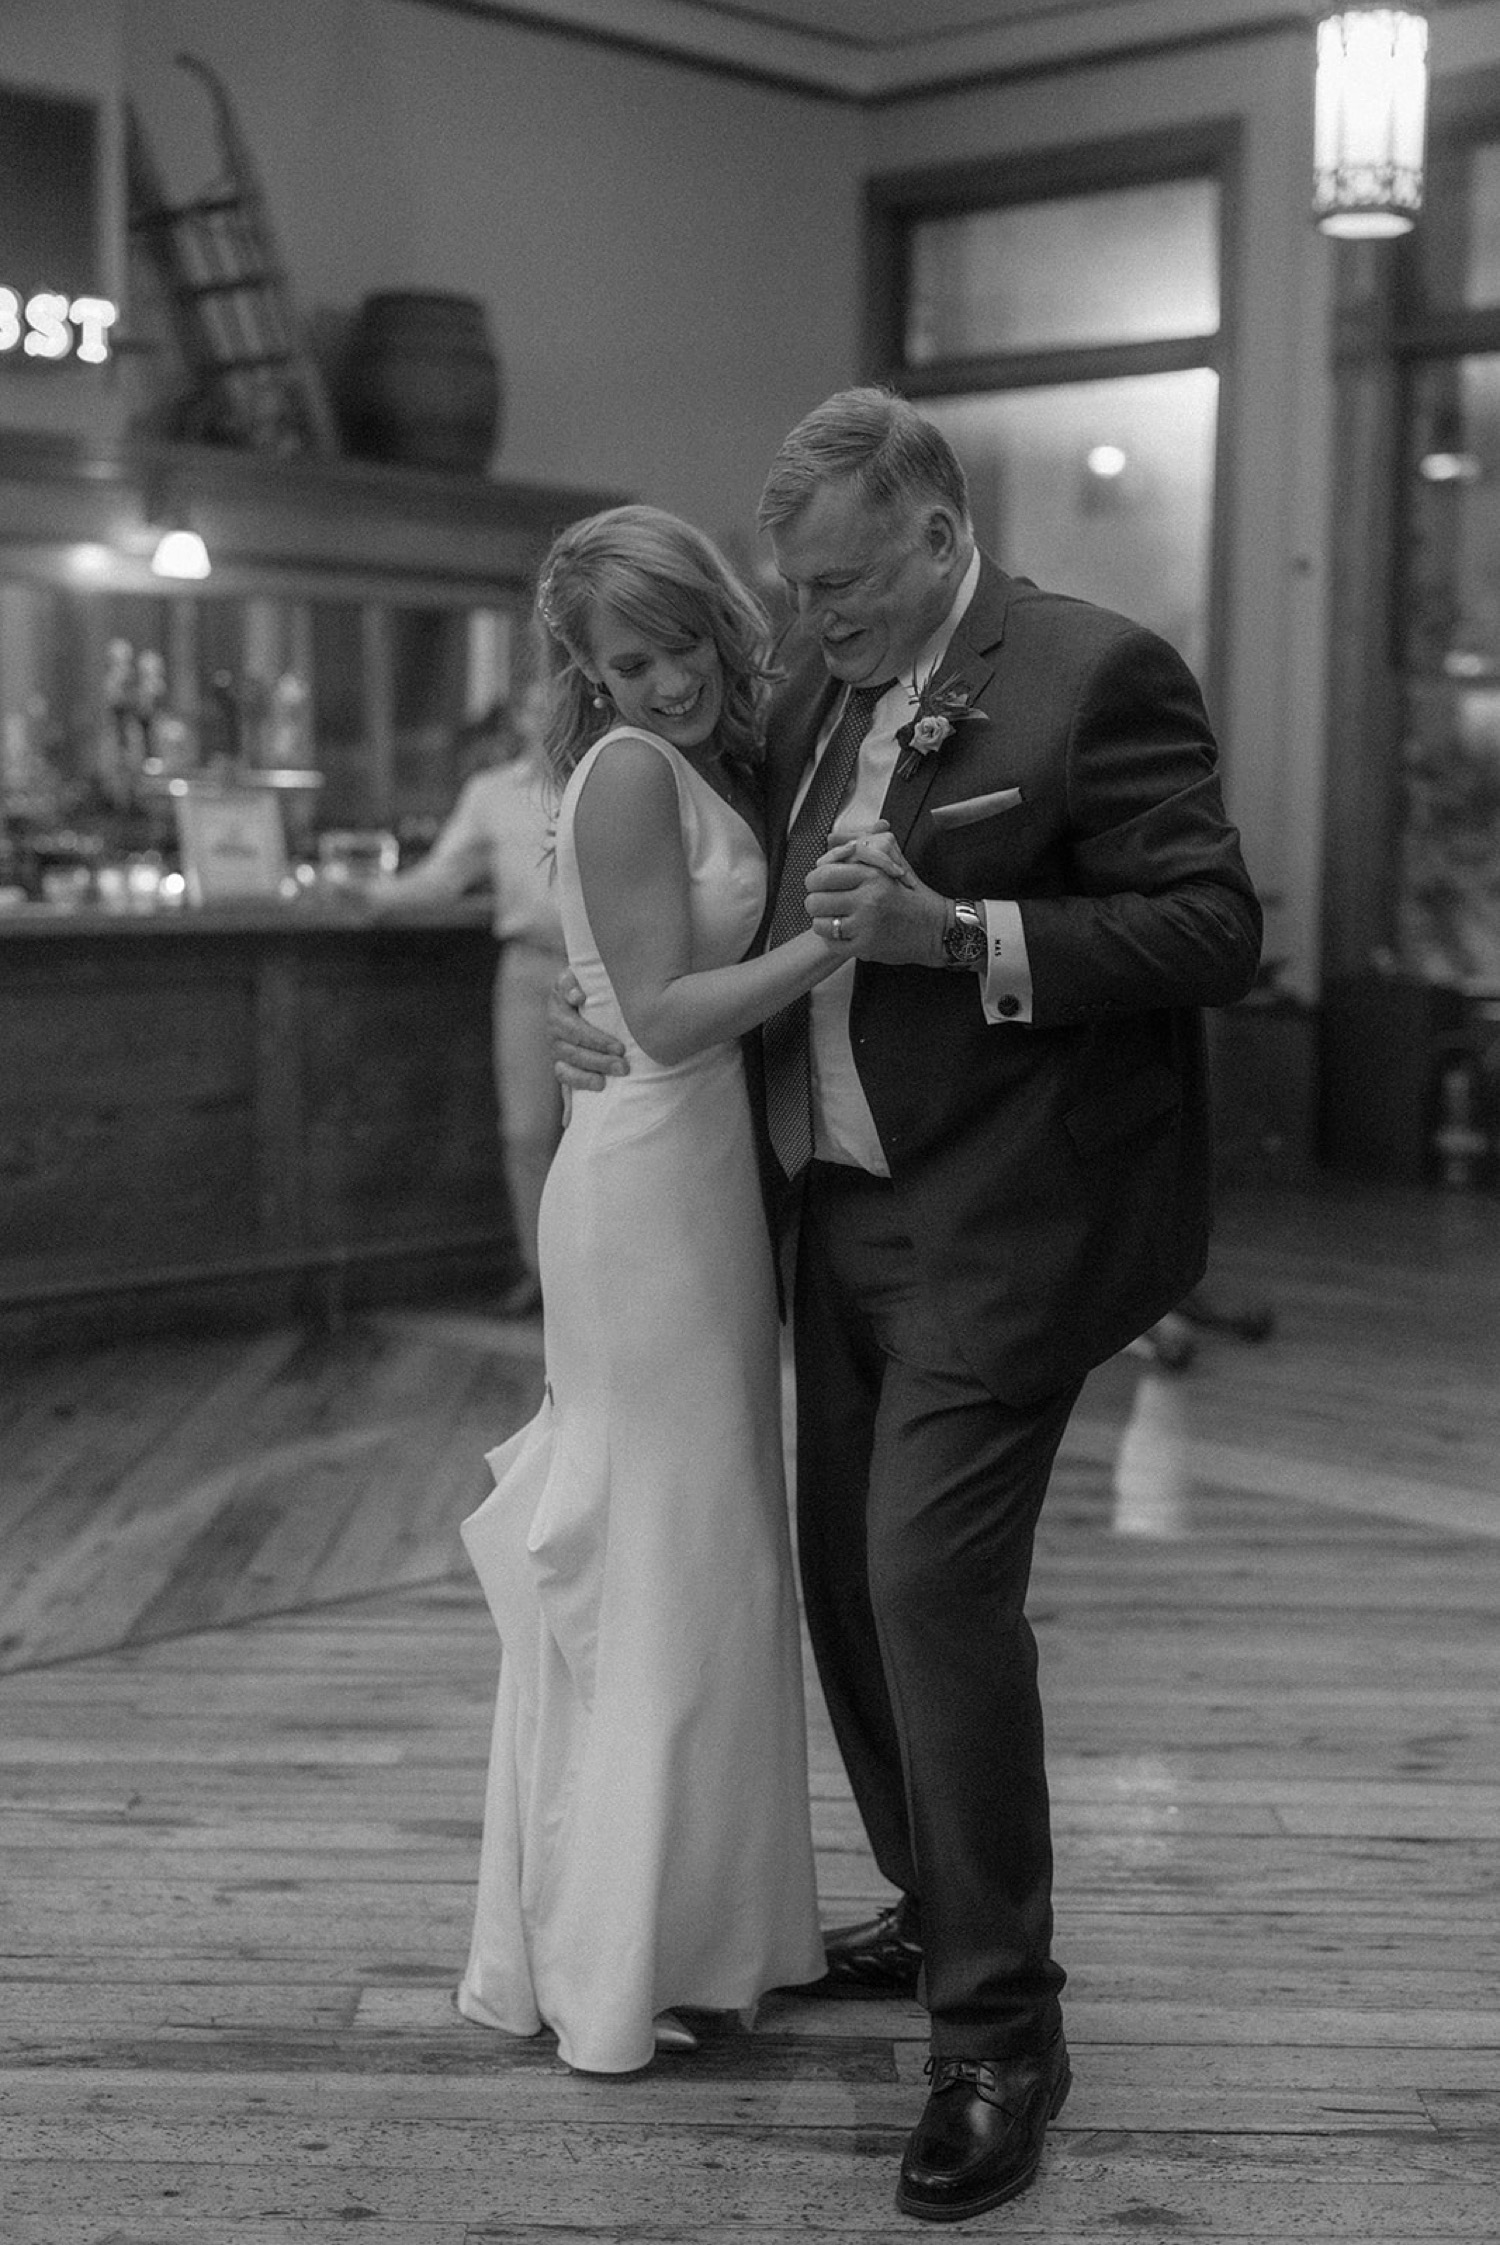 father daughter dance wedding reception